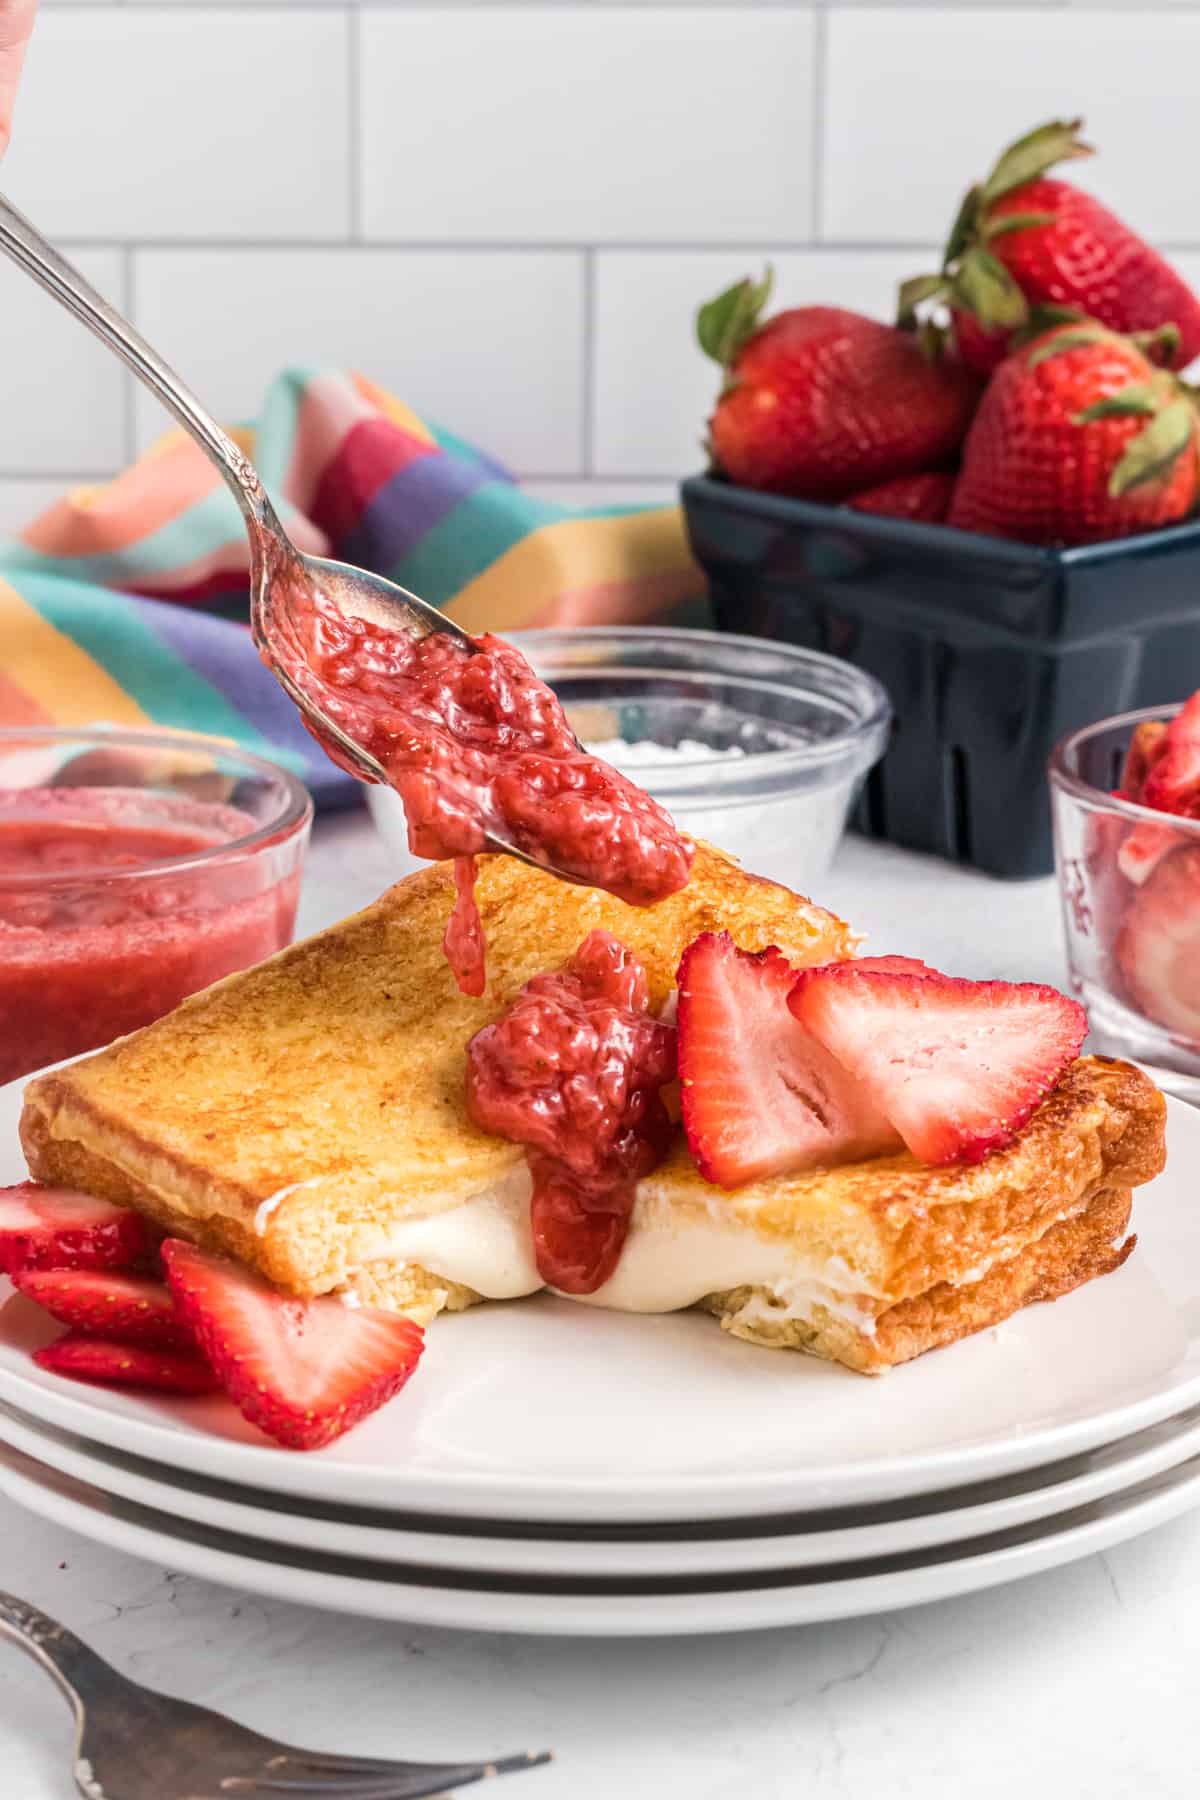 Starwberry compote is being drizzled atop a slice of stuffed french toast.